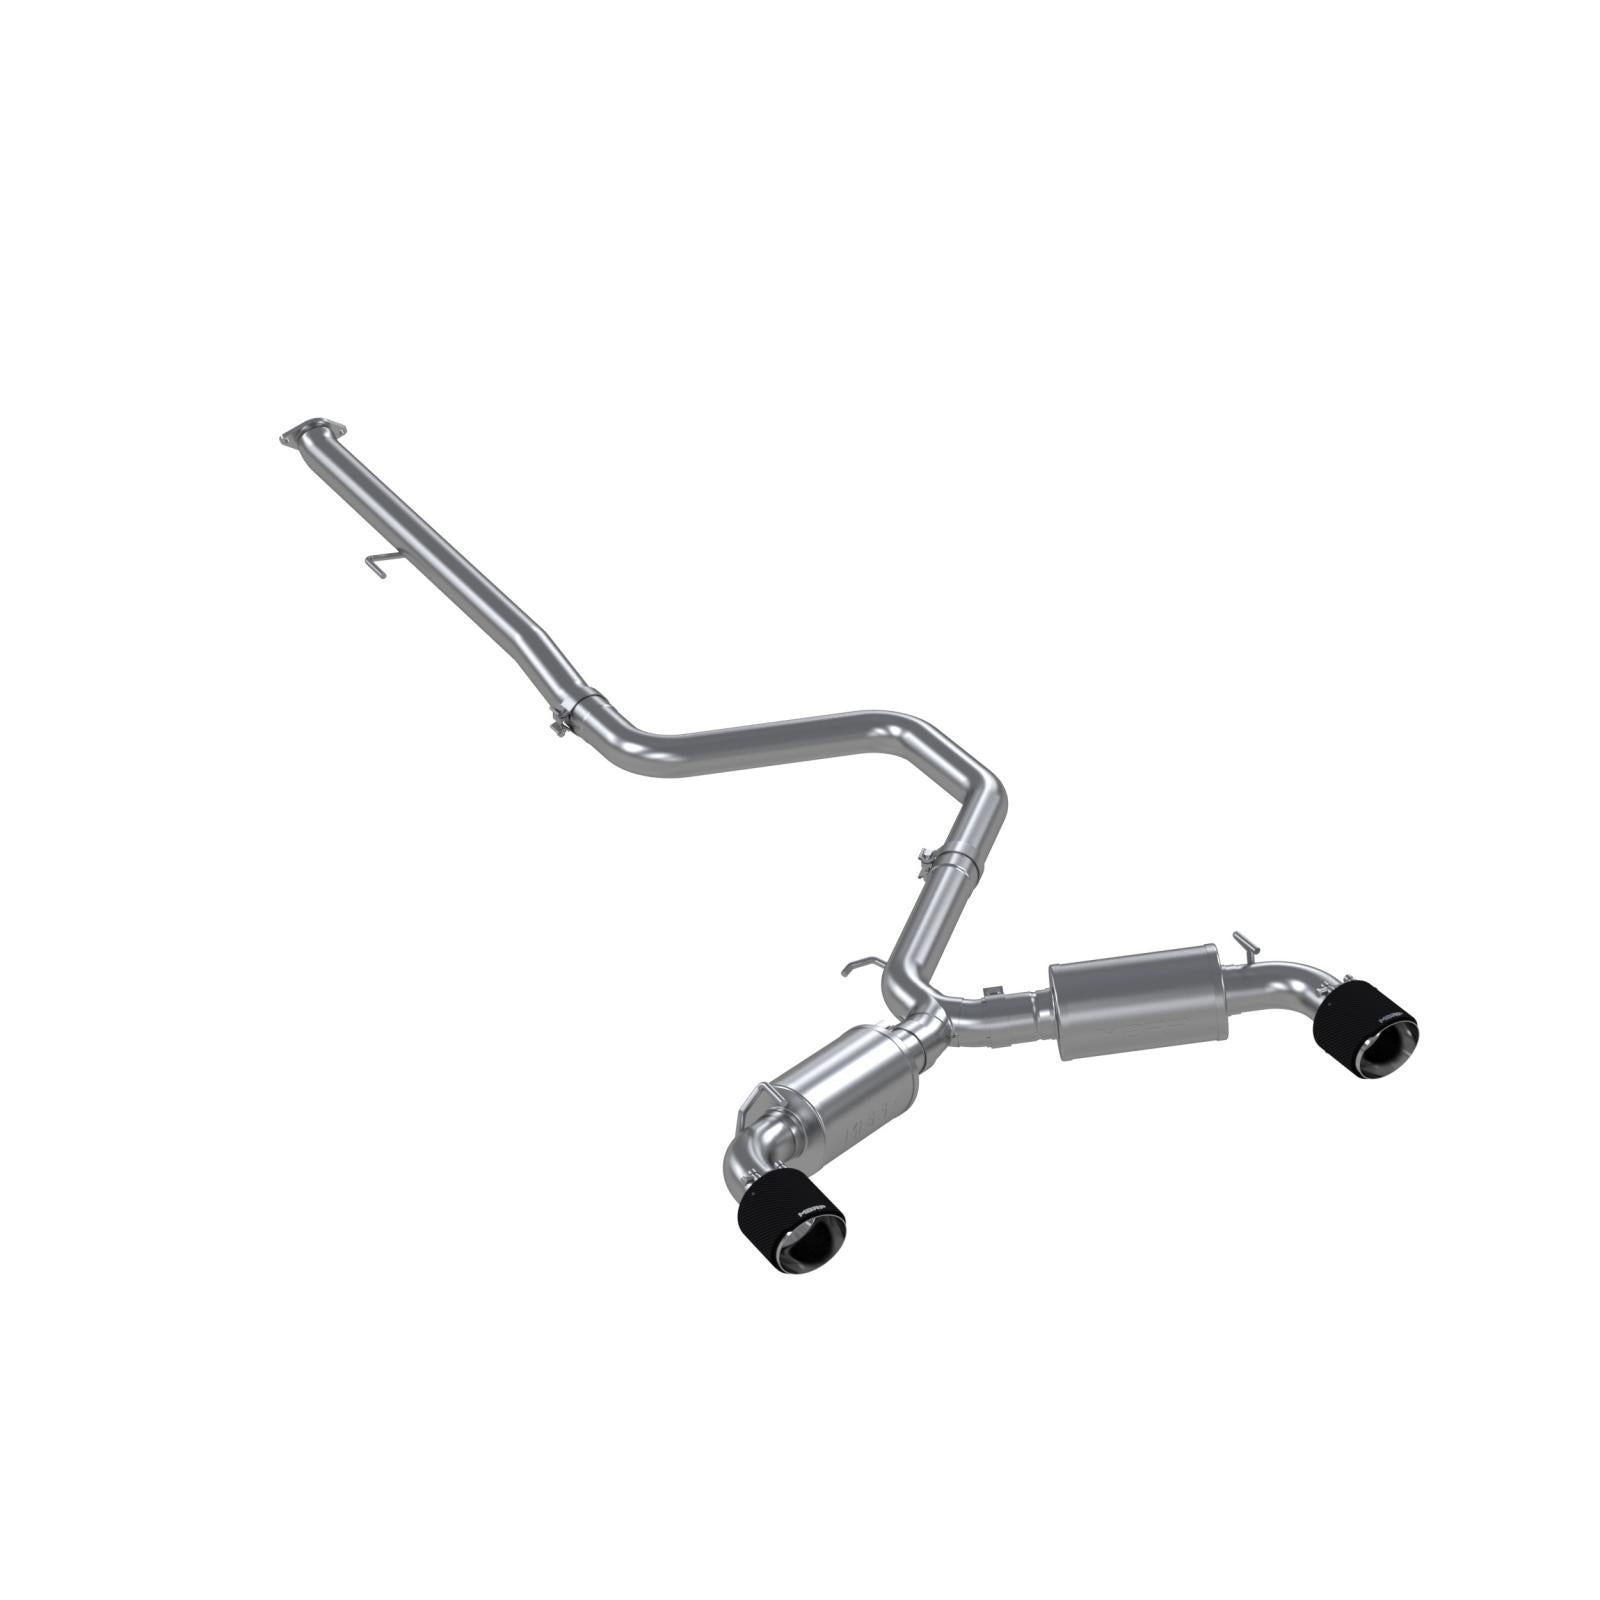 MBRP Exhaust T304 Stainless Steel 3 inch Cat-Back Dual Split Rear with Carbon Fiber Tips (2) 5 inch OD Carbon Fiber Tips Included MBRP S47063CF